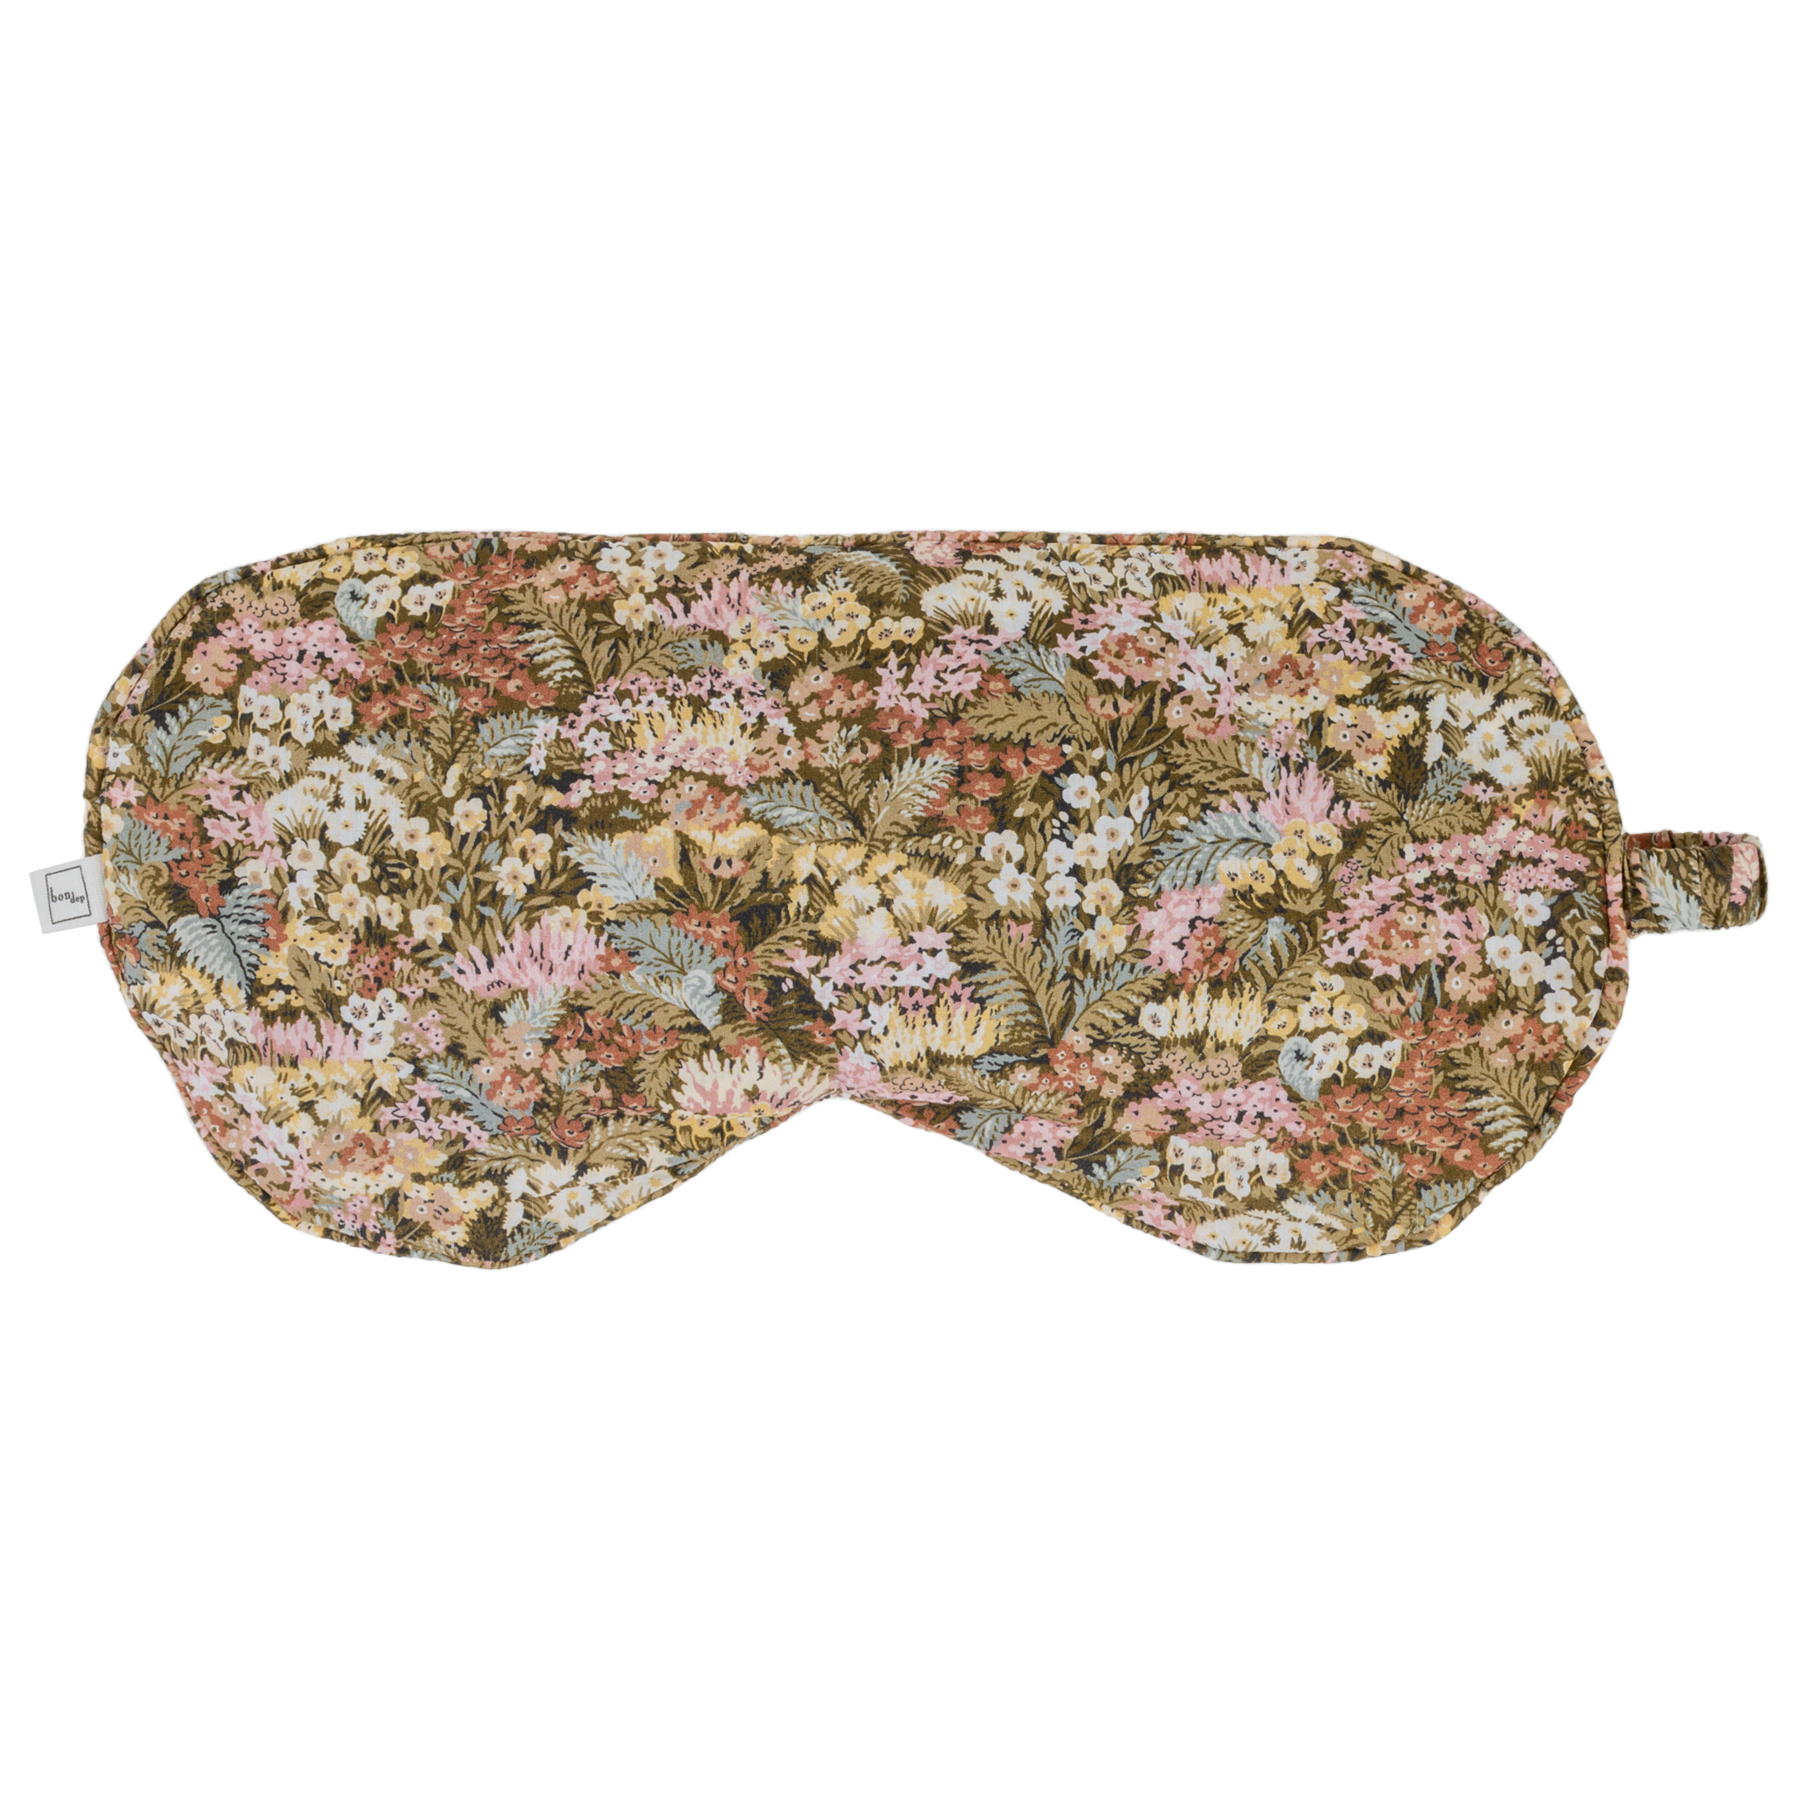 Image of Relaxing Eye masks mw Liberty Connie Evelyn from Bon Dep Essentials